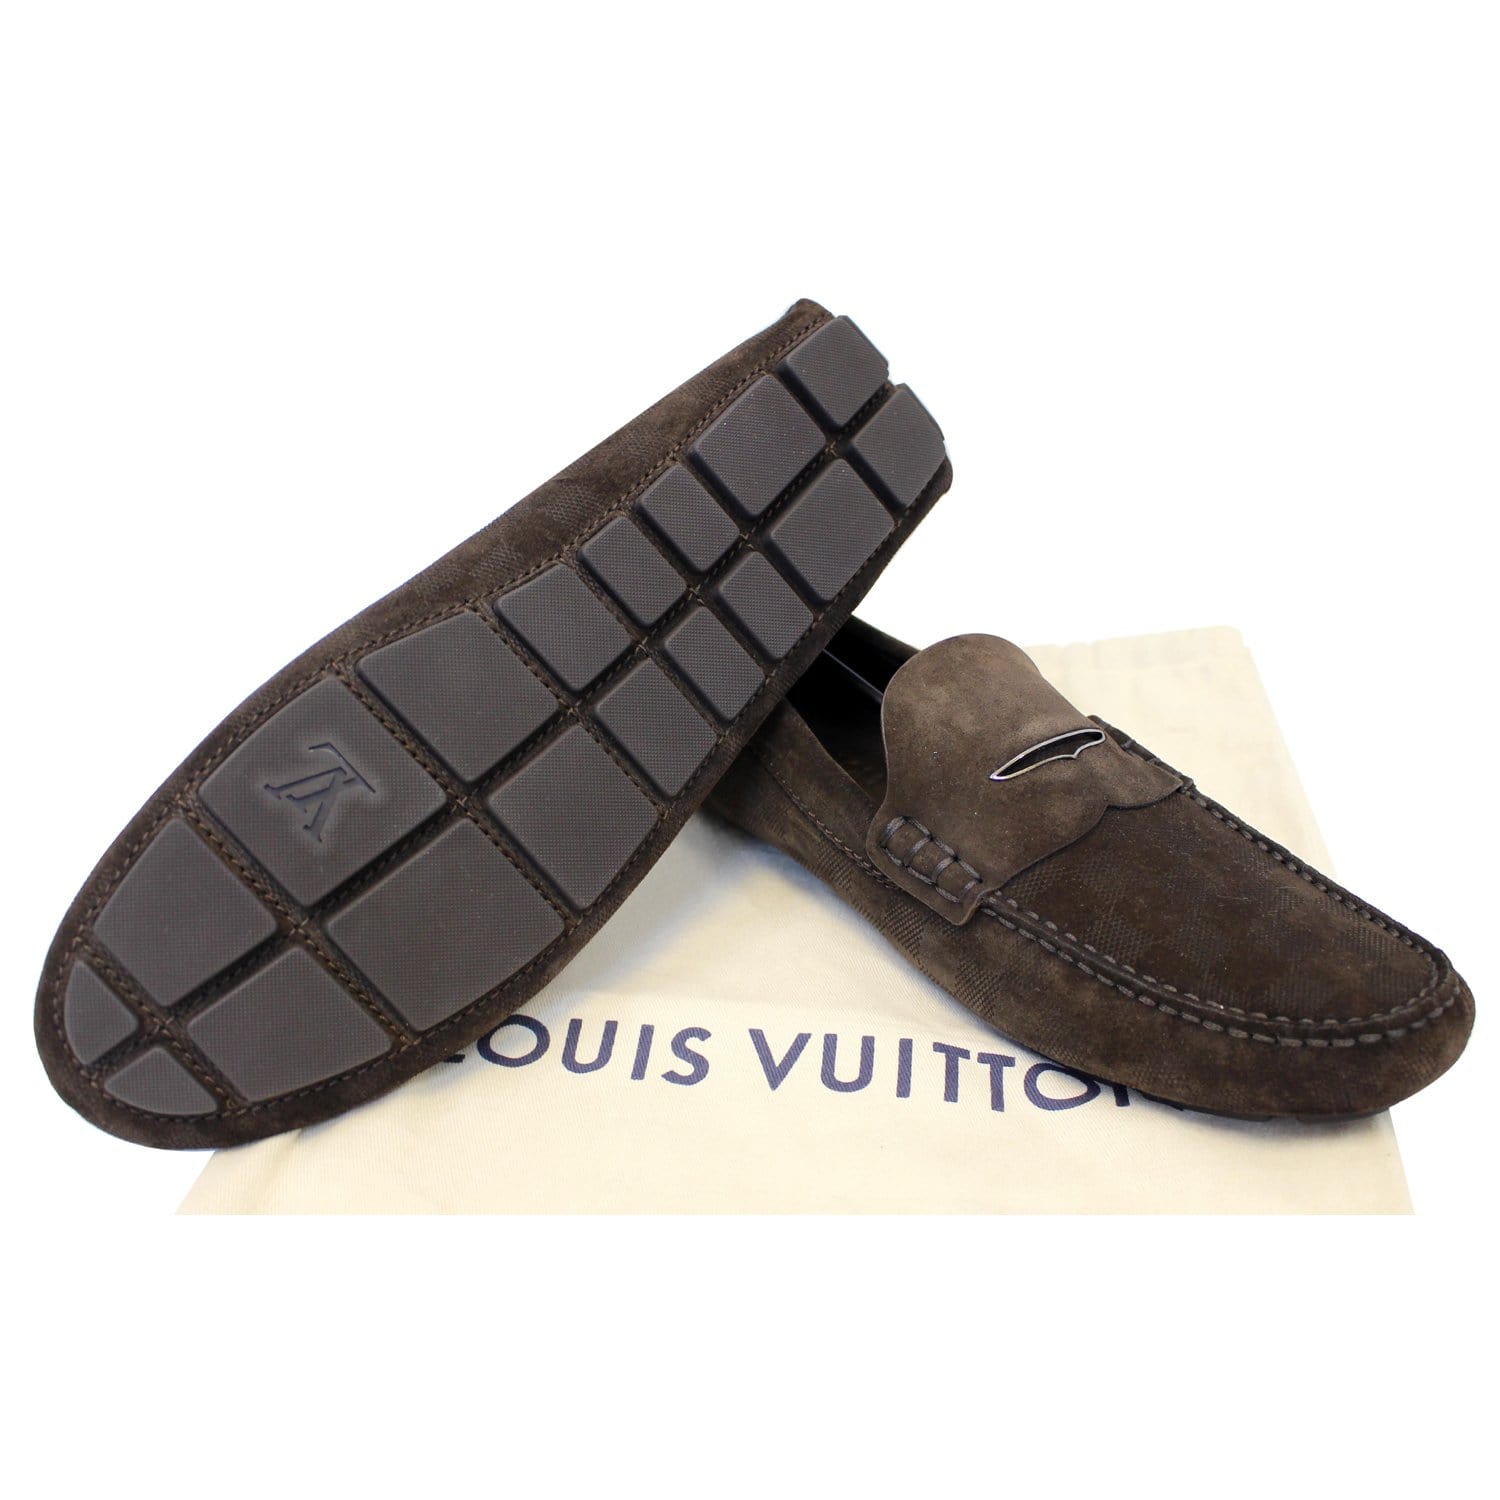 Find *LOUIS VUITTON * Check Mocassins Very High Quality Faux Leather Upper  Material by Lookielooks near me, T B Sanatorium, Vadodara, Gujarat